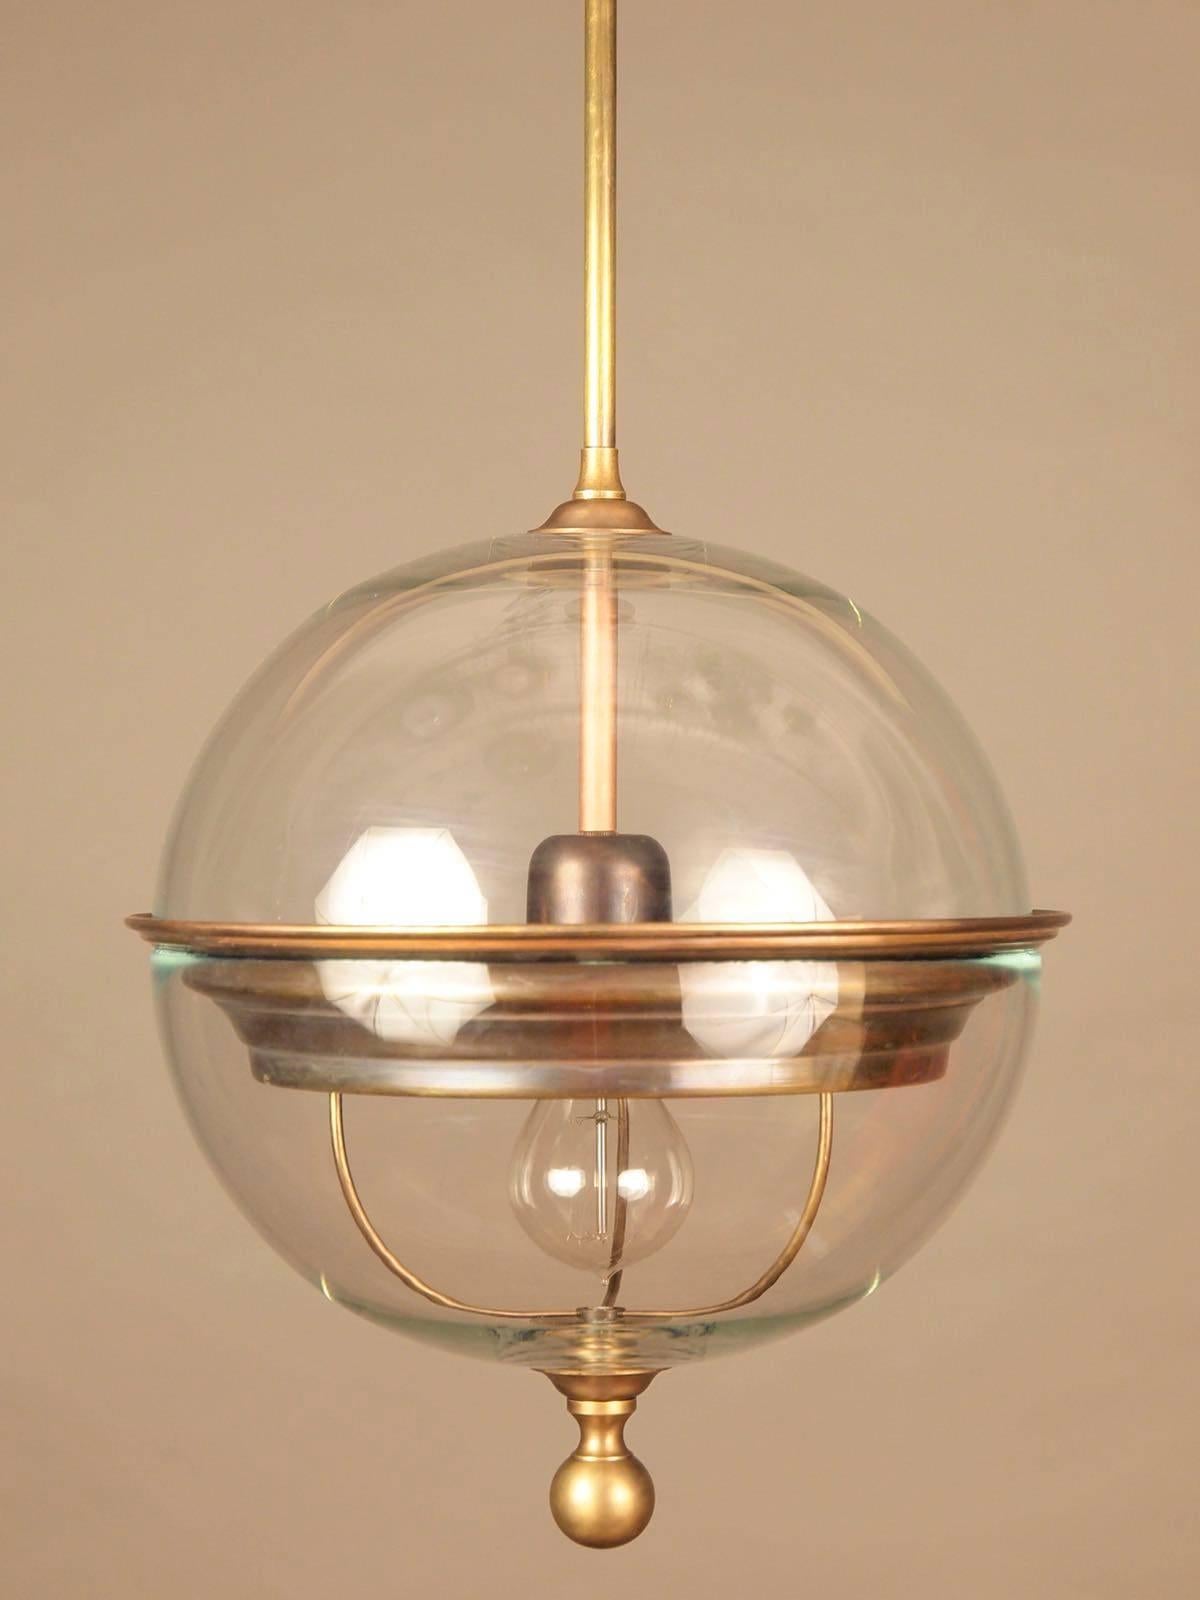 Pair of contemporary Italian clear glass globe shaped pendants with bronze details.
The globe has a brass finial bottom.
Measures: Globe light fixture height is 13.5